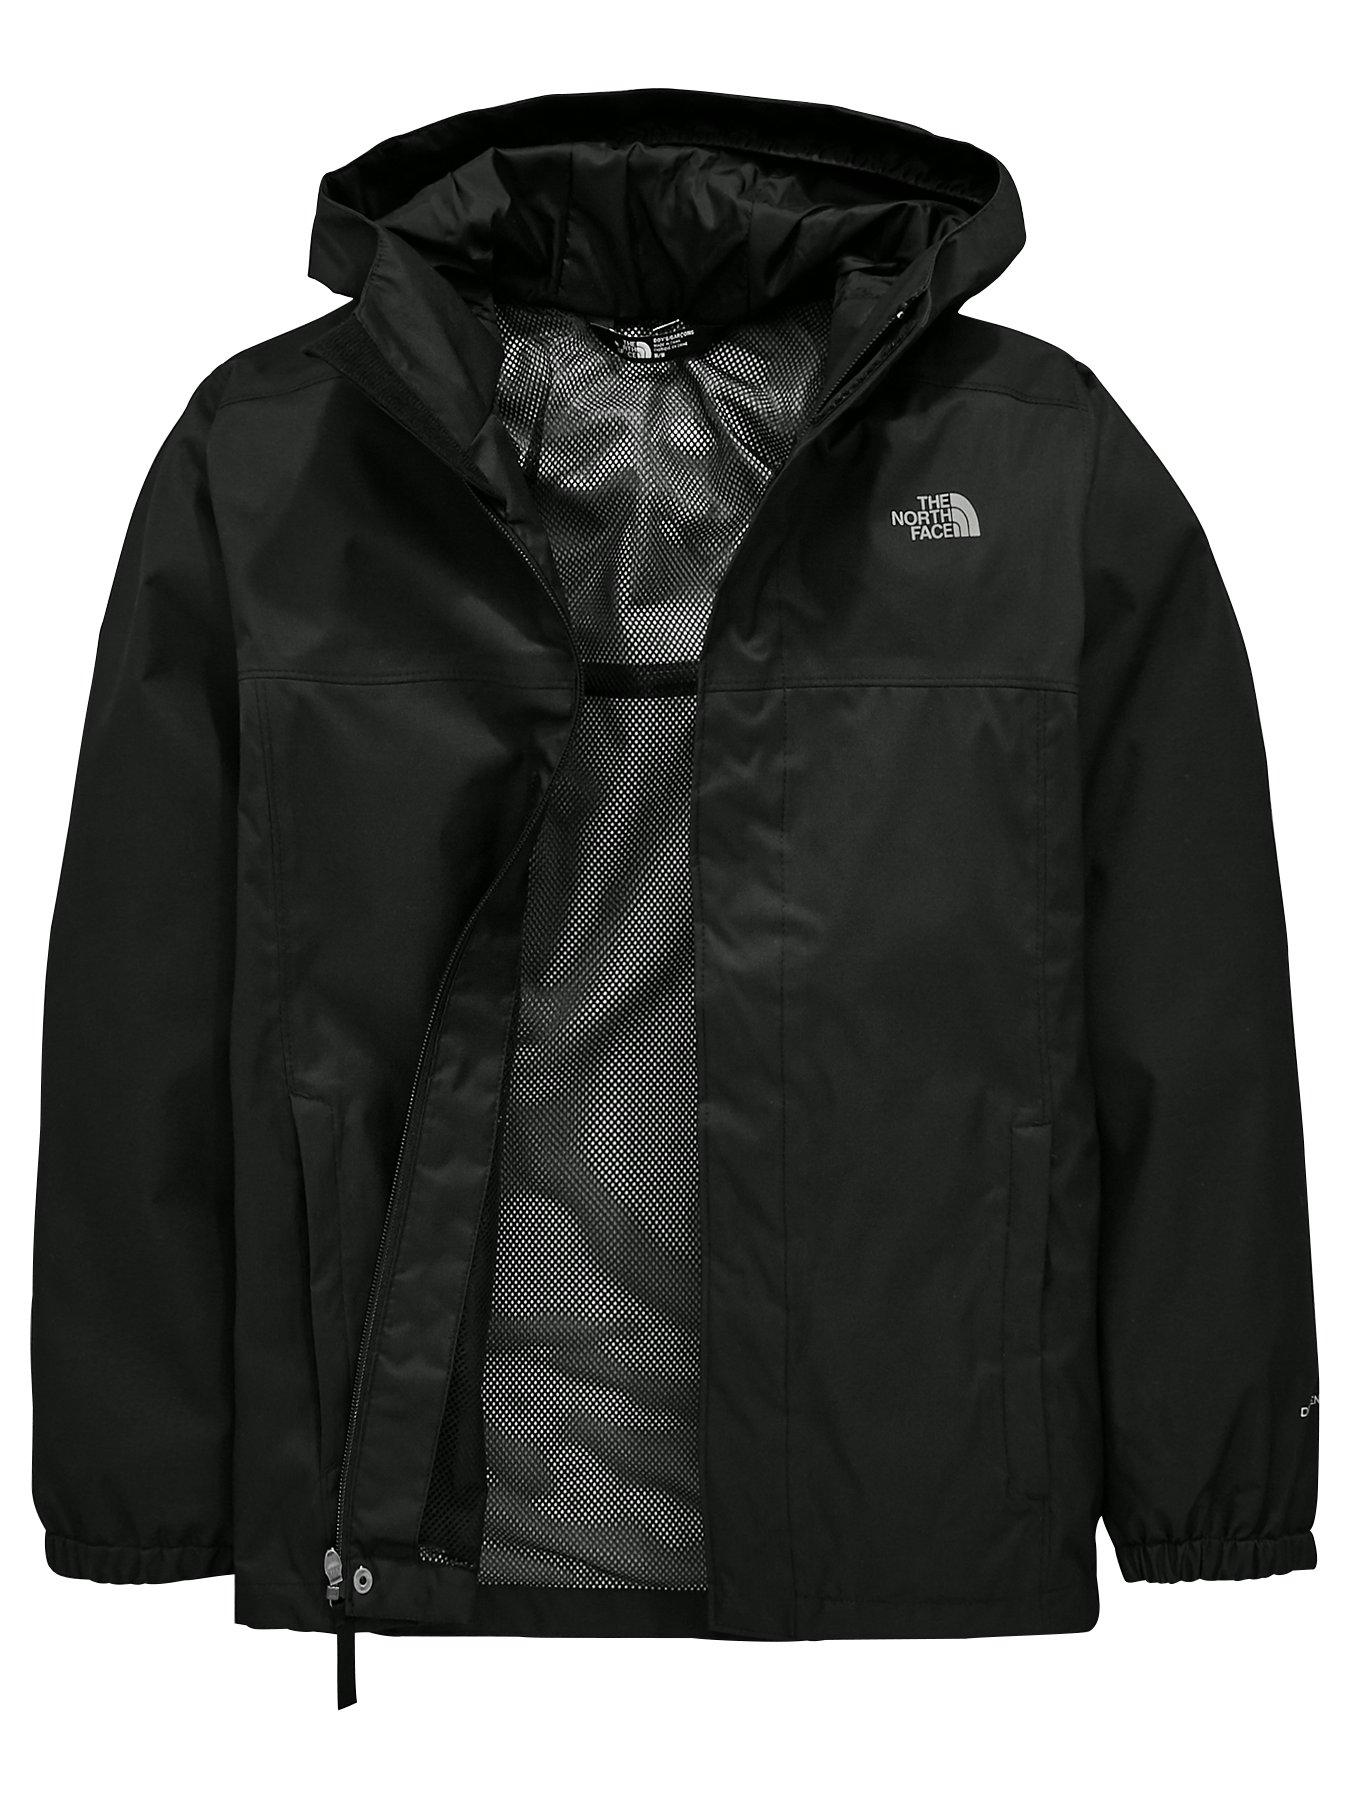 cheap north face jackets for toddlers